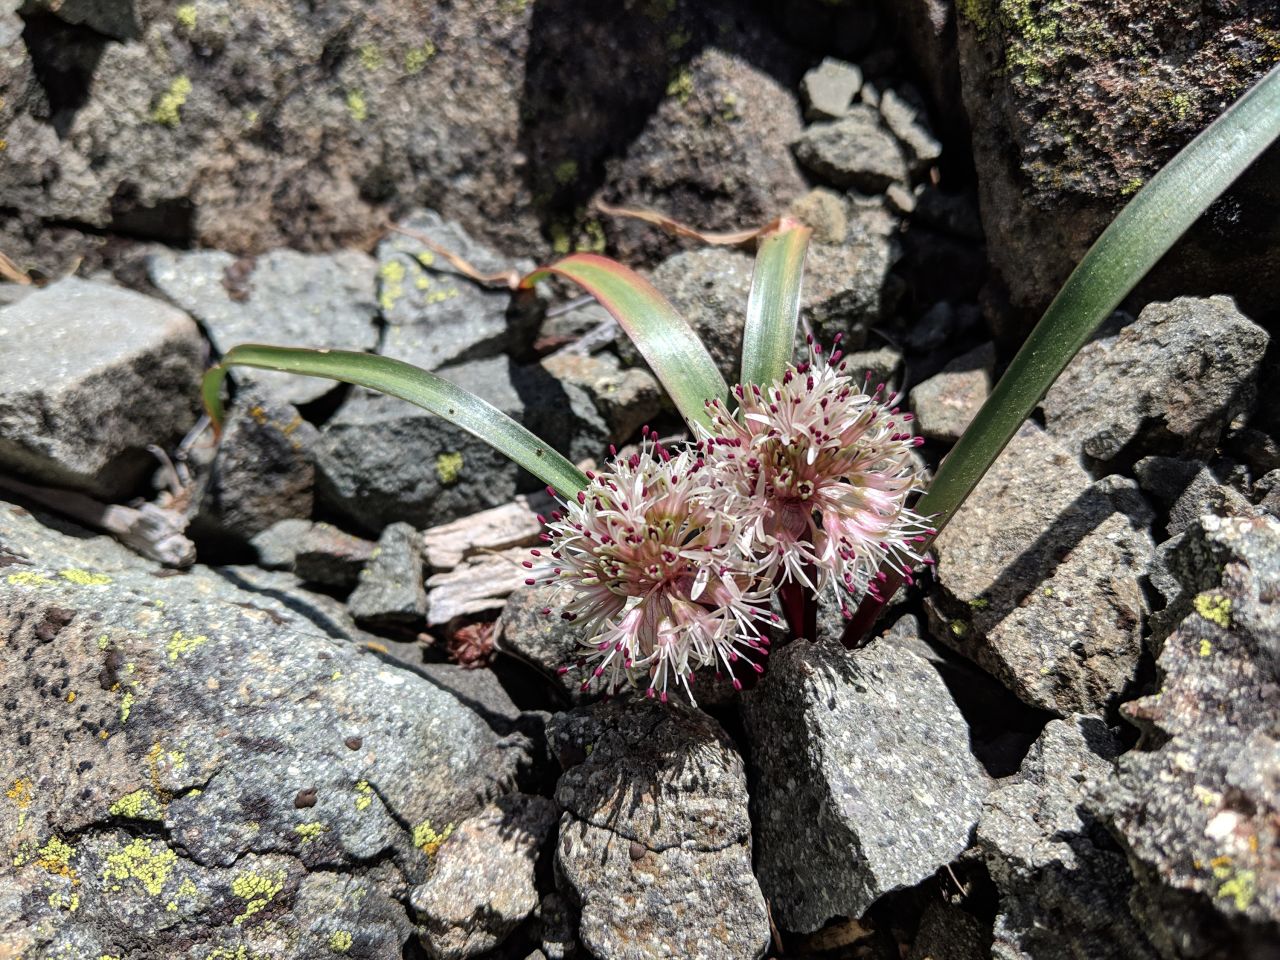 The Minnesota Mountain onion was found by chance in 2015, during a brief excursion on top of the California peak by researchers on a helicopter trip. Recently, more of this onion was found on nearby Salt Creek Mountain, confirming it as a new species.